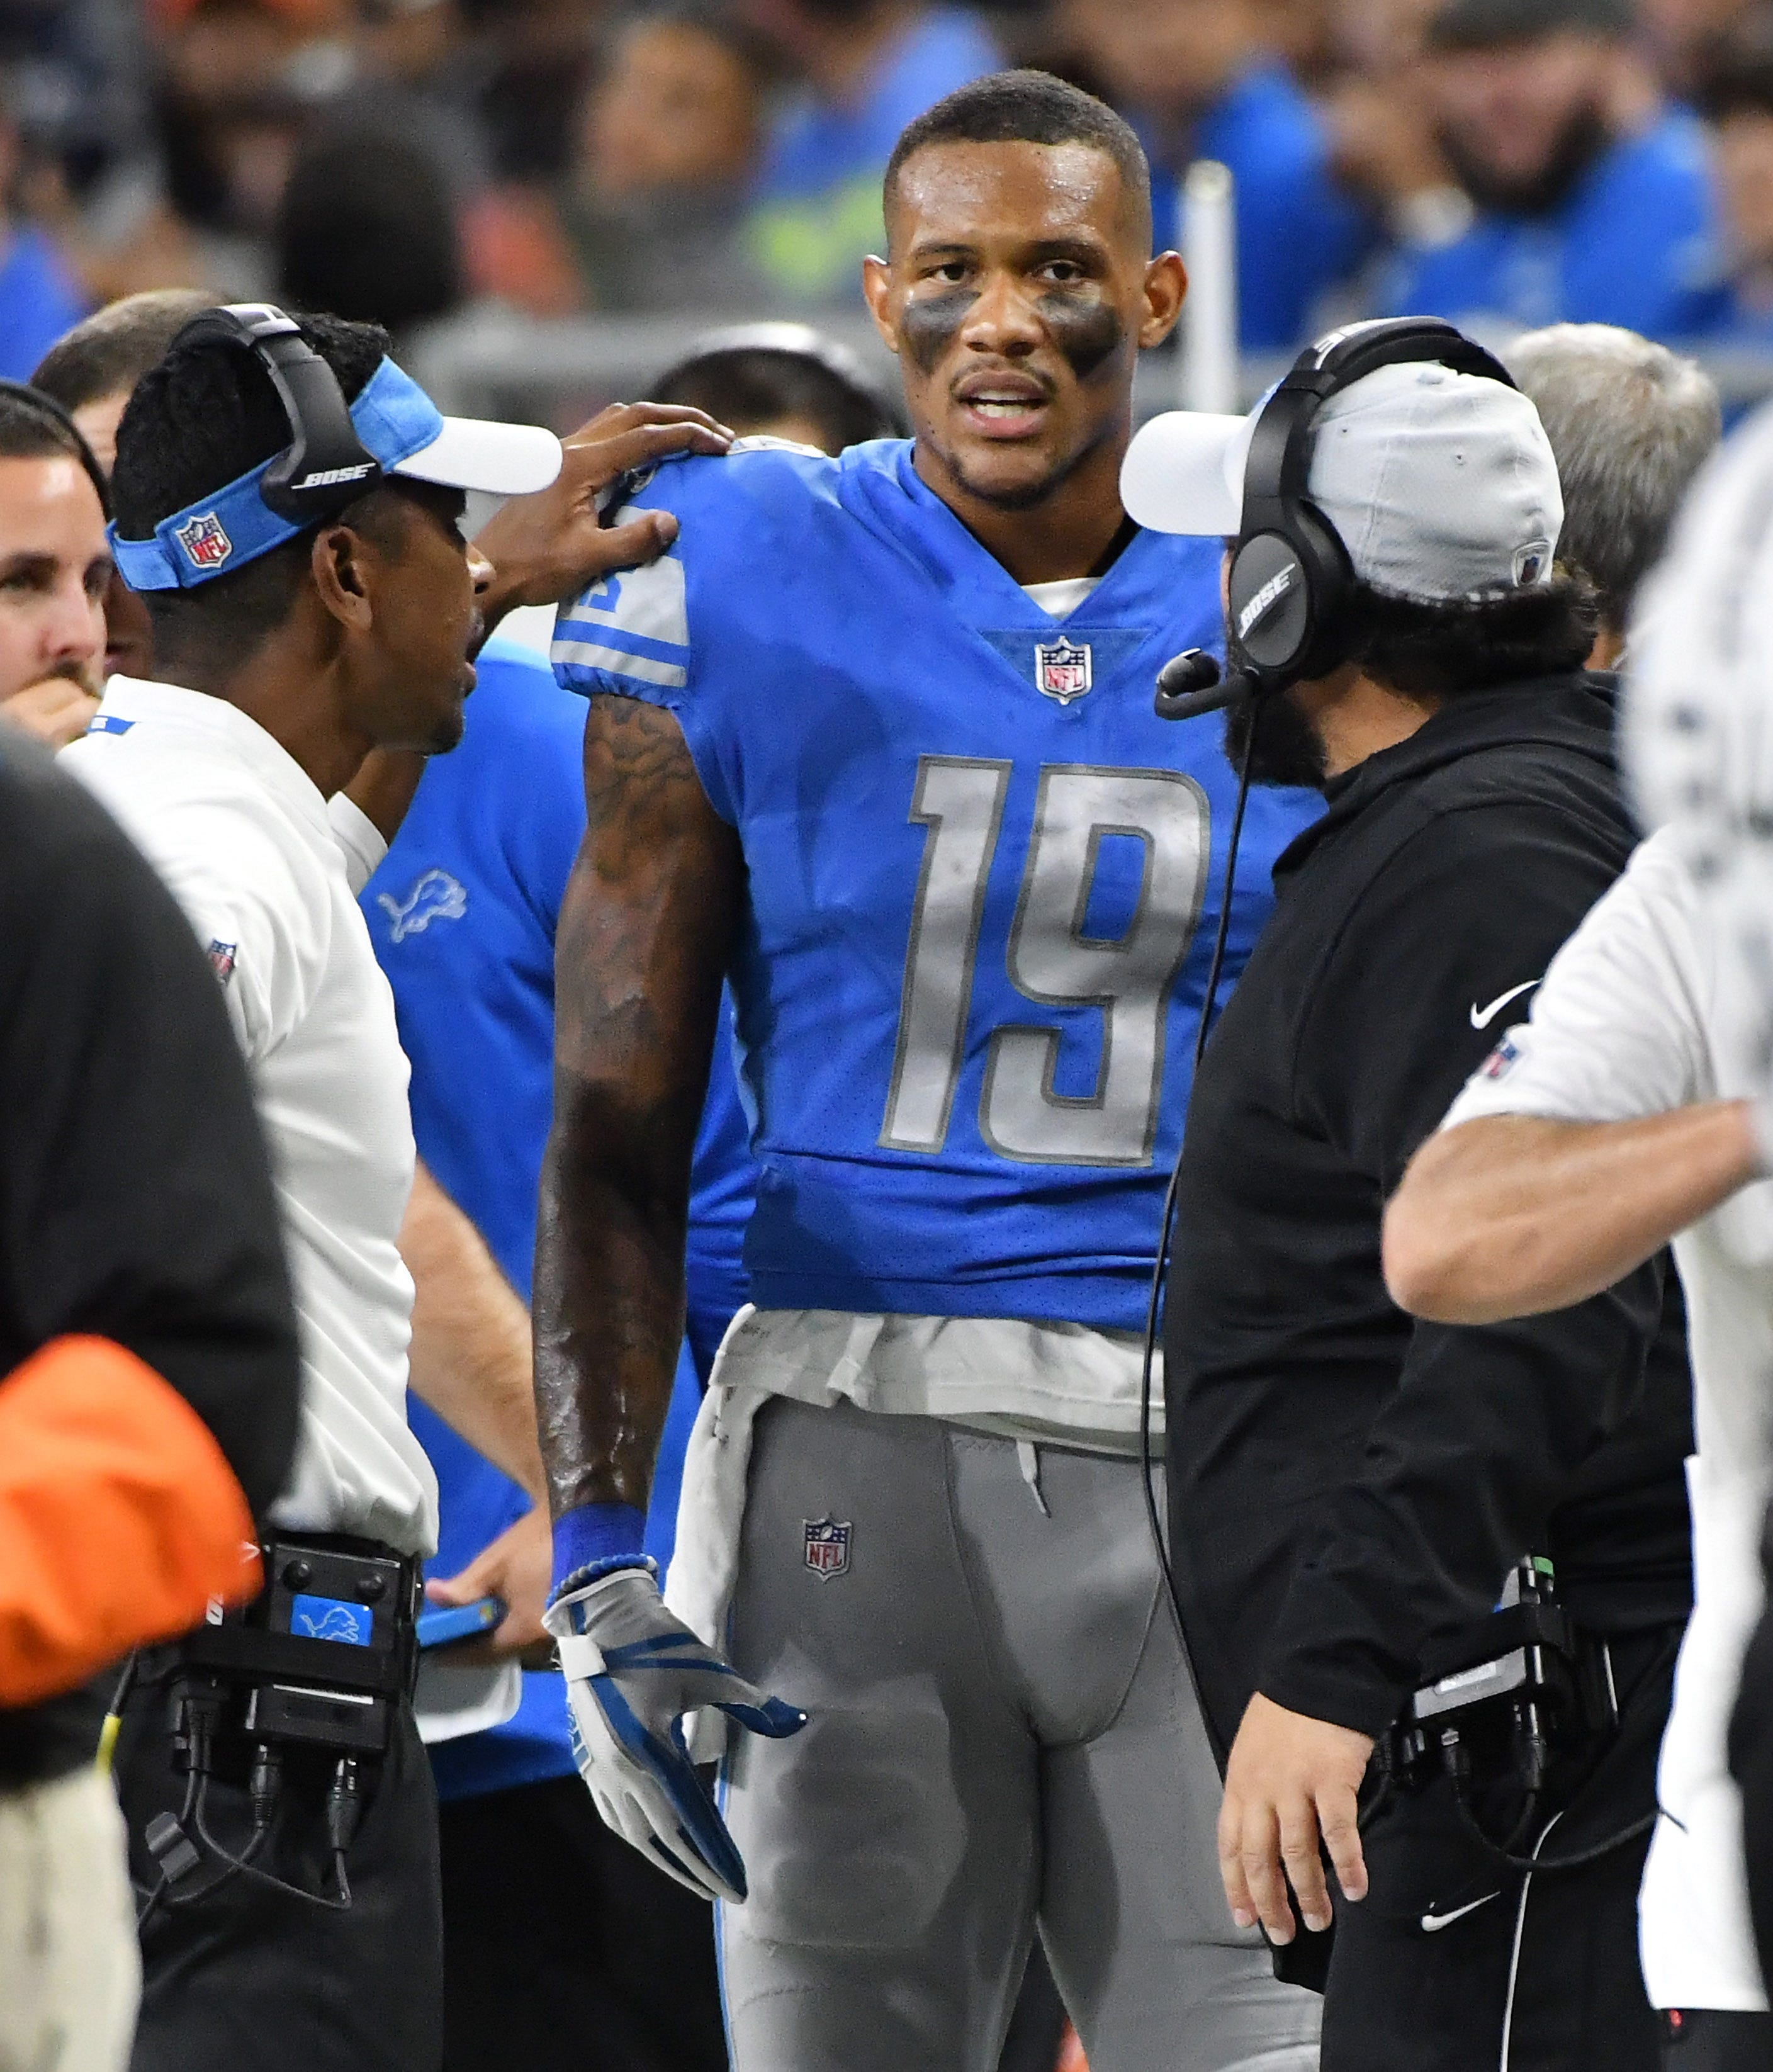 Lions ' Kenny Golladay on the sidelines during the review of the goal-line play in the second quarter. After review it was ruled a touchdown.